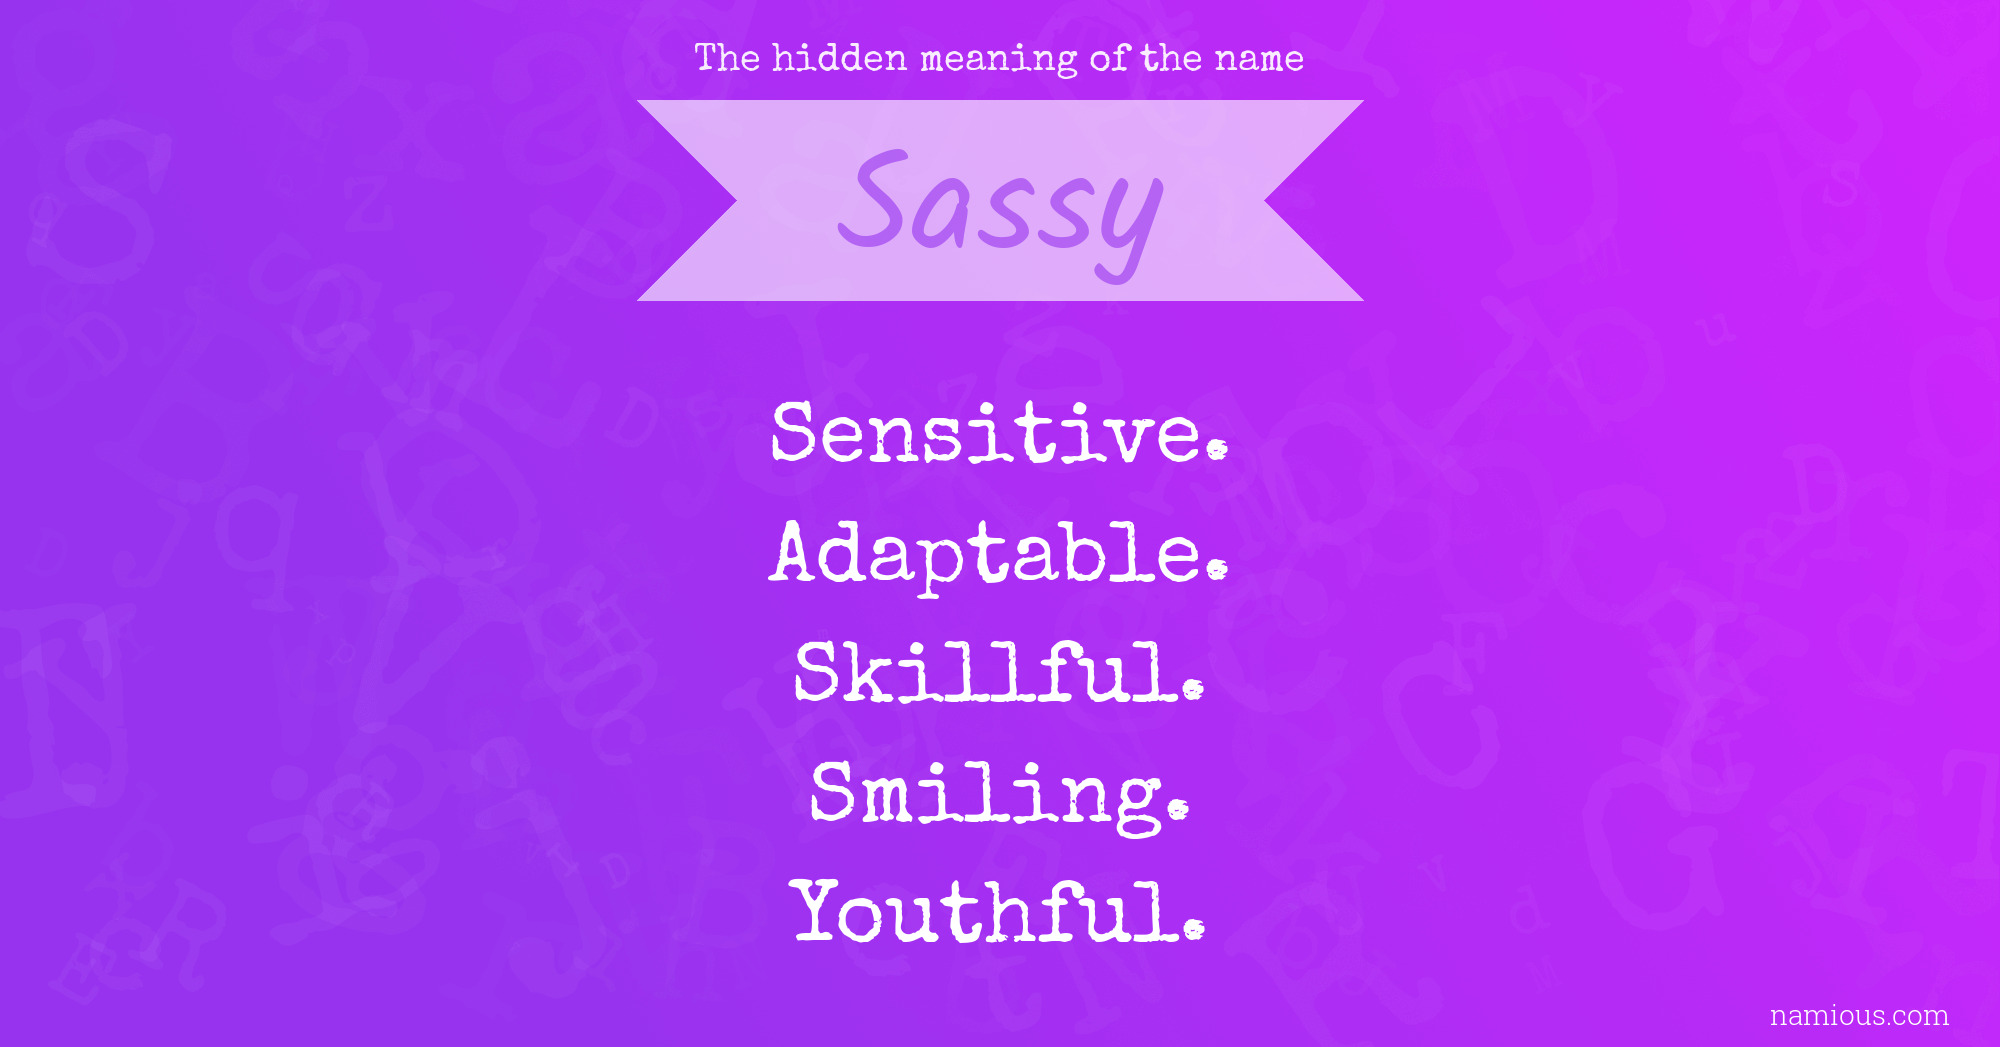 The hidden meaning of the name Sassy